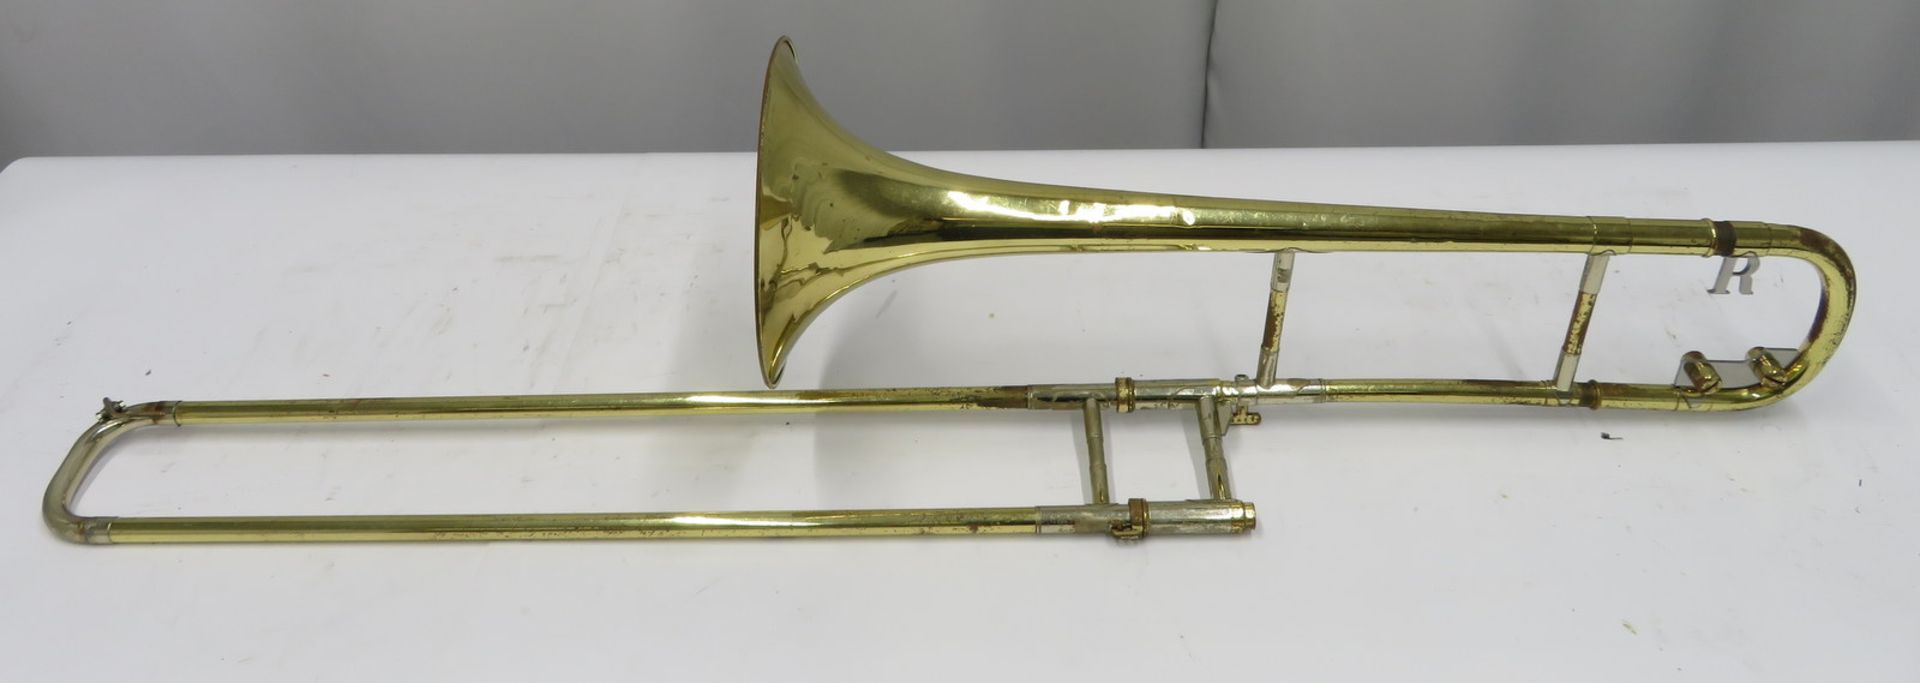 Rath R4 trombone with case. Serial number: R4144. - Image 3 of 16